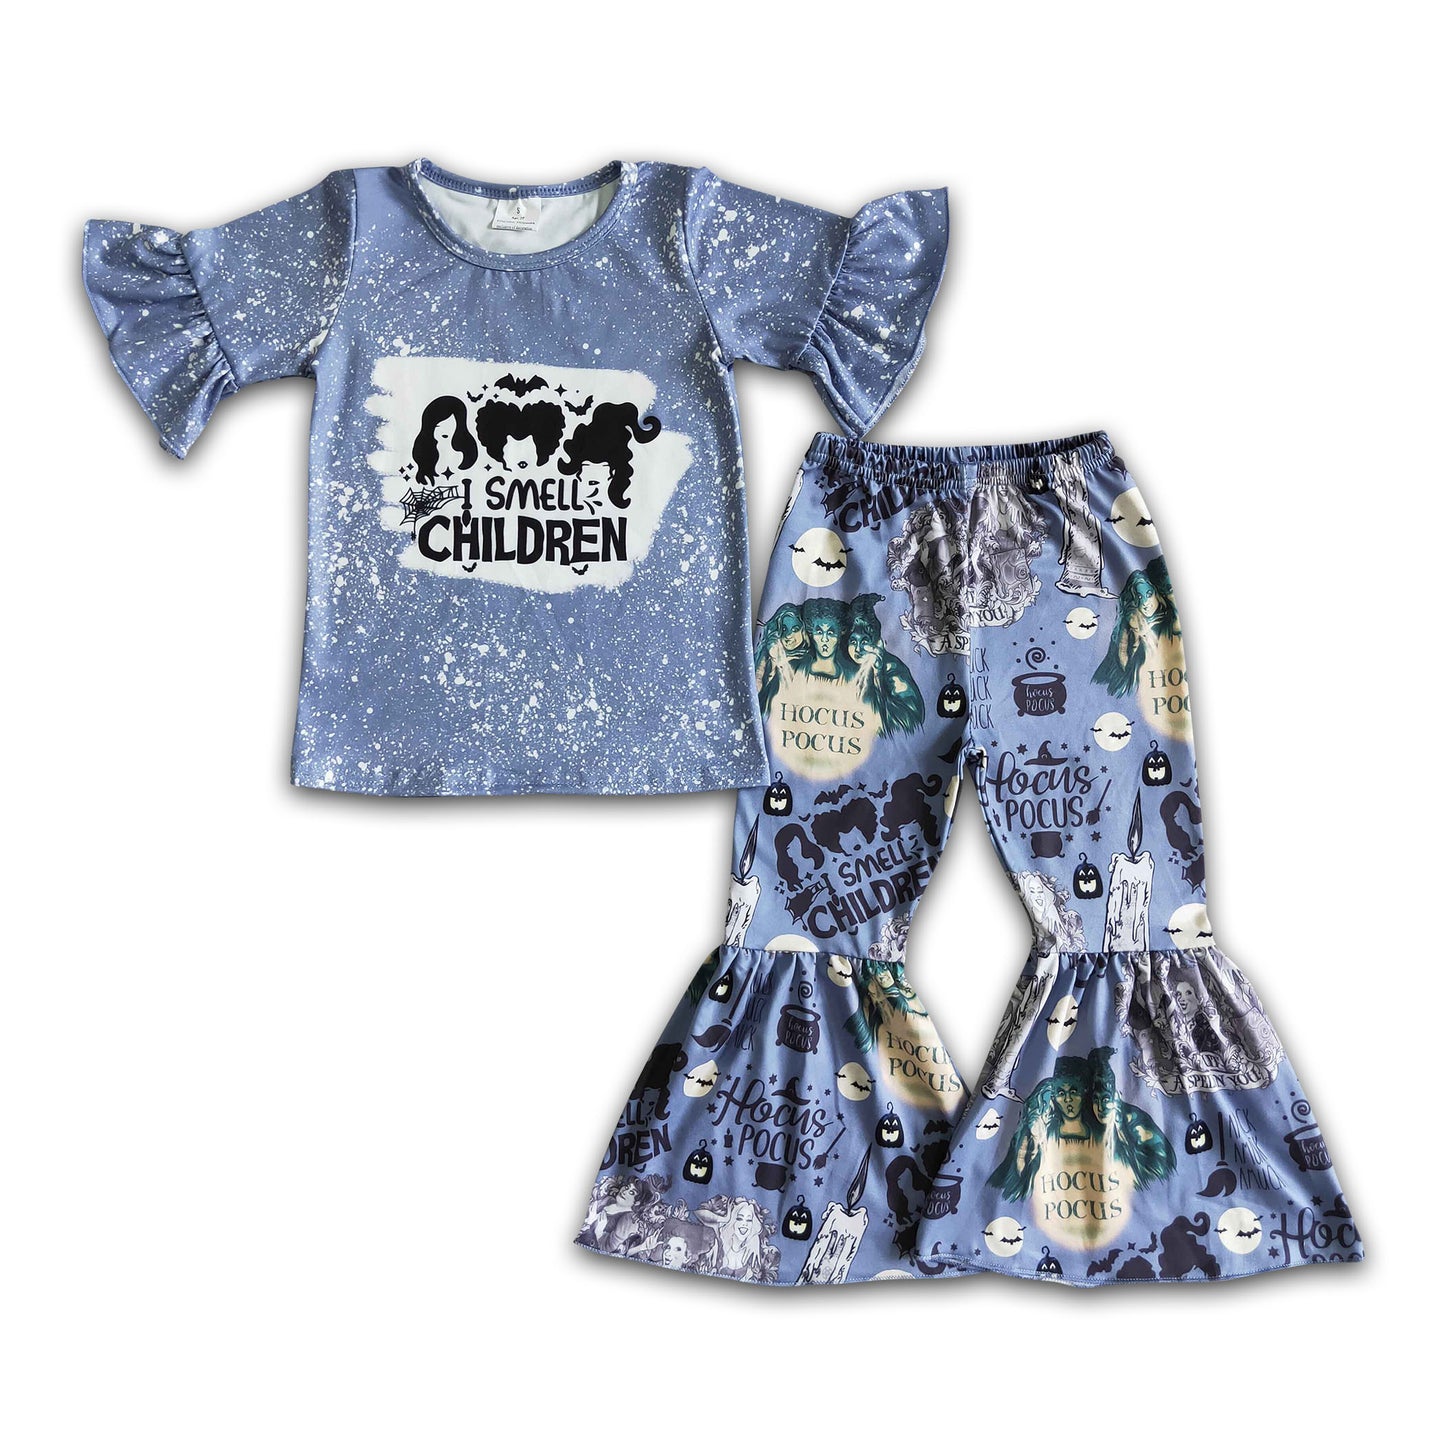 Short sleeve bleached witches shirt girls Halloween clothing set